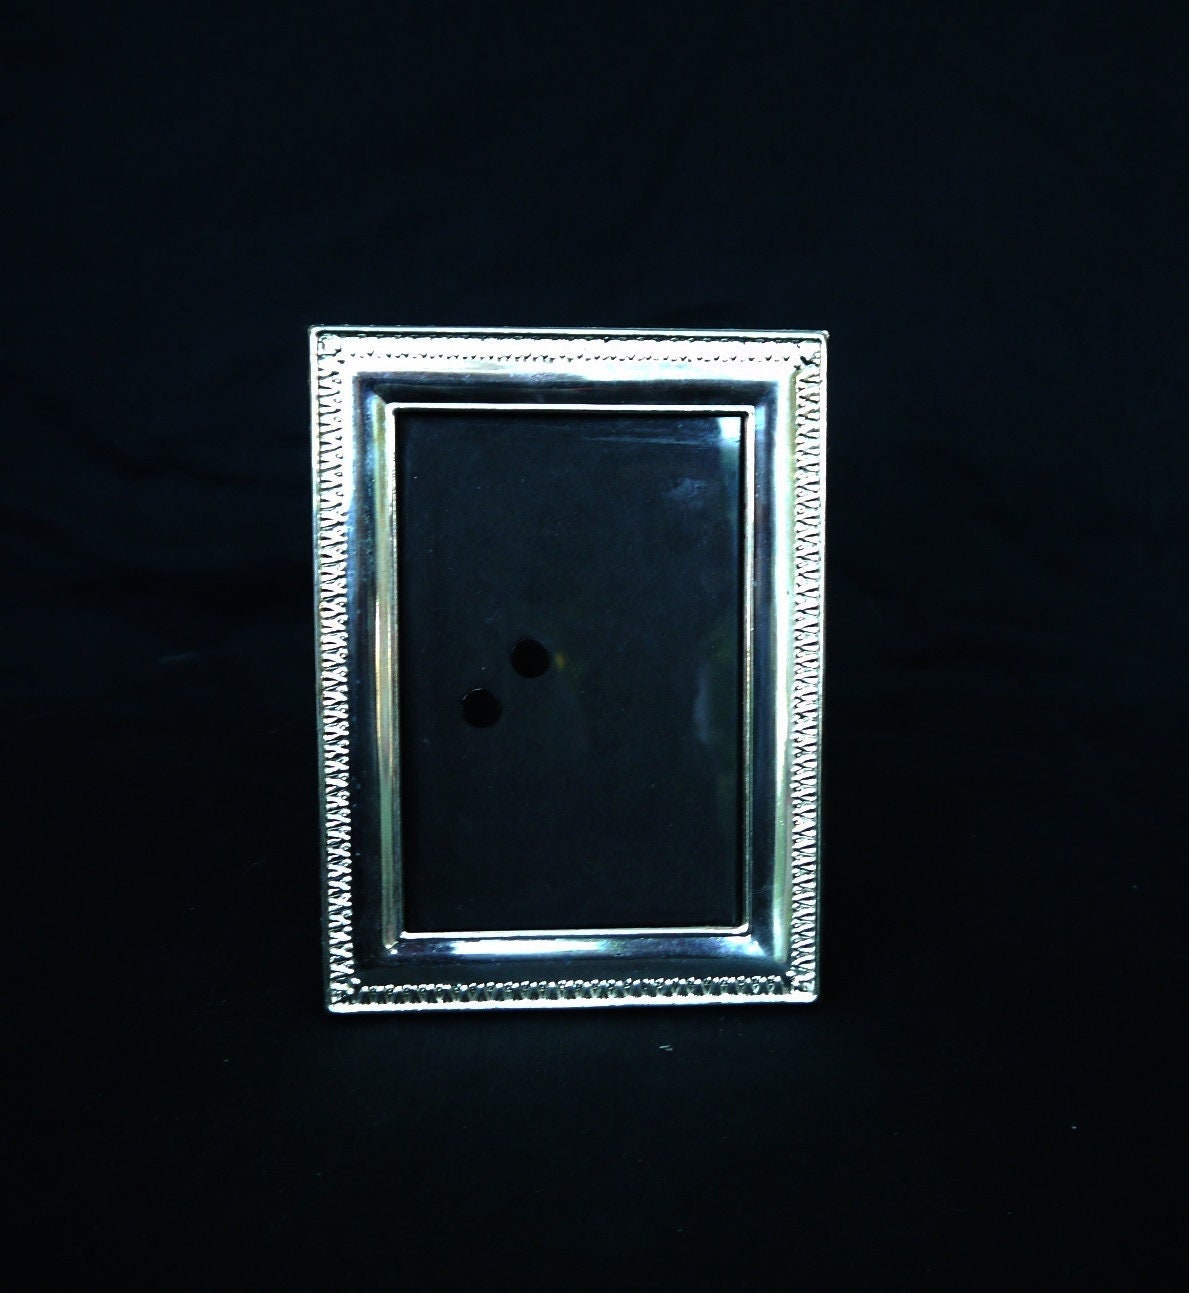 3/4 Zinc Plated Metal Ribbon with Ovals & Dots - Picture Frames, Weddings,  Altered Art, Lamp Shades